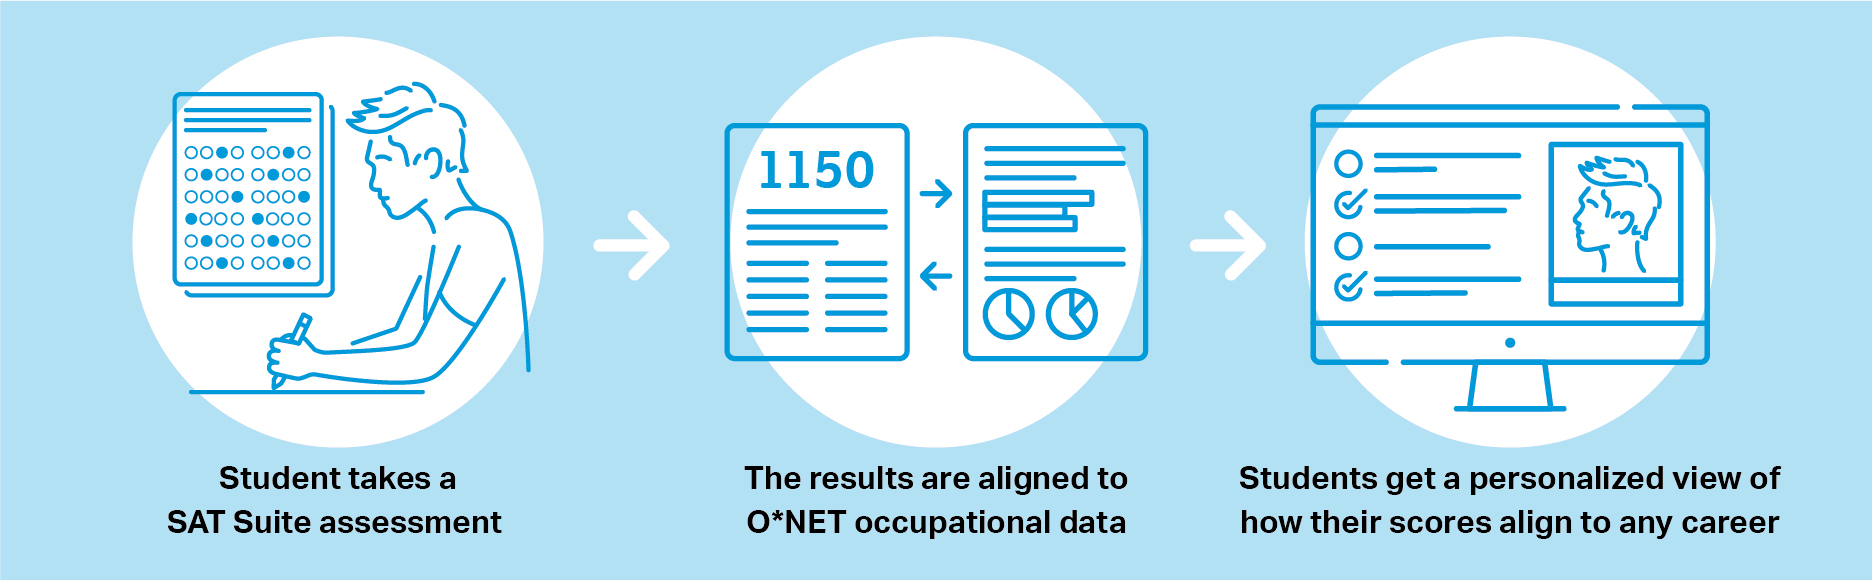 Infographic displaying Student take a SAT Suite assessment, The results are aligned to O NET occupational data, Students get a personalized view of how their scores align to any career. 